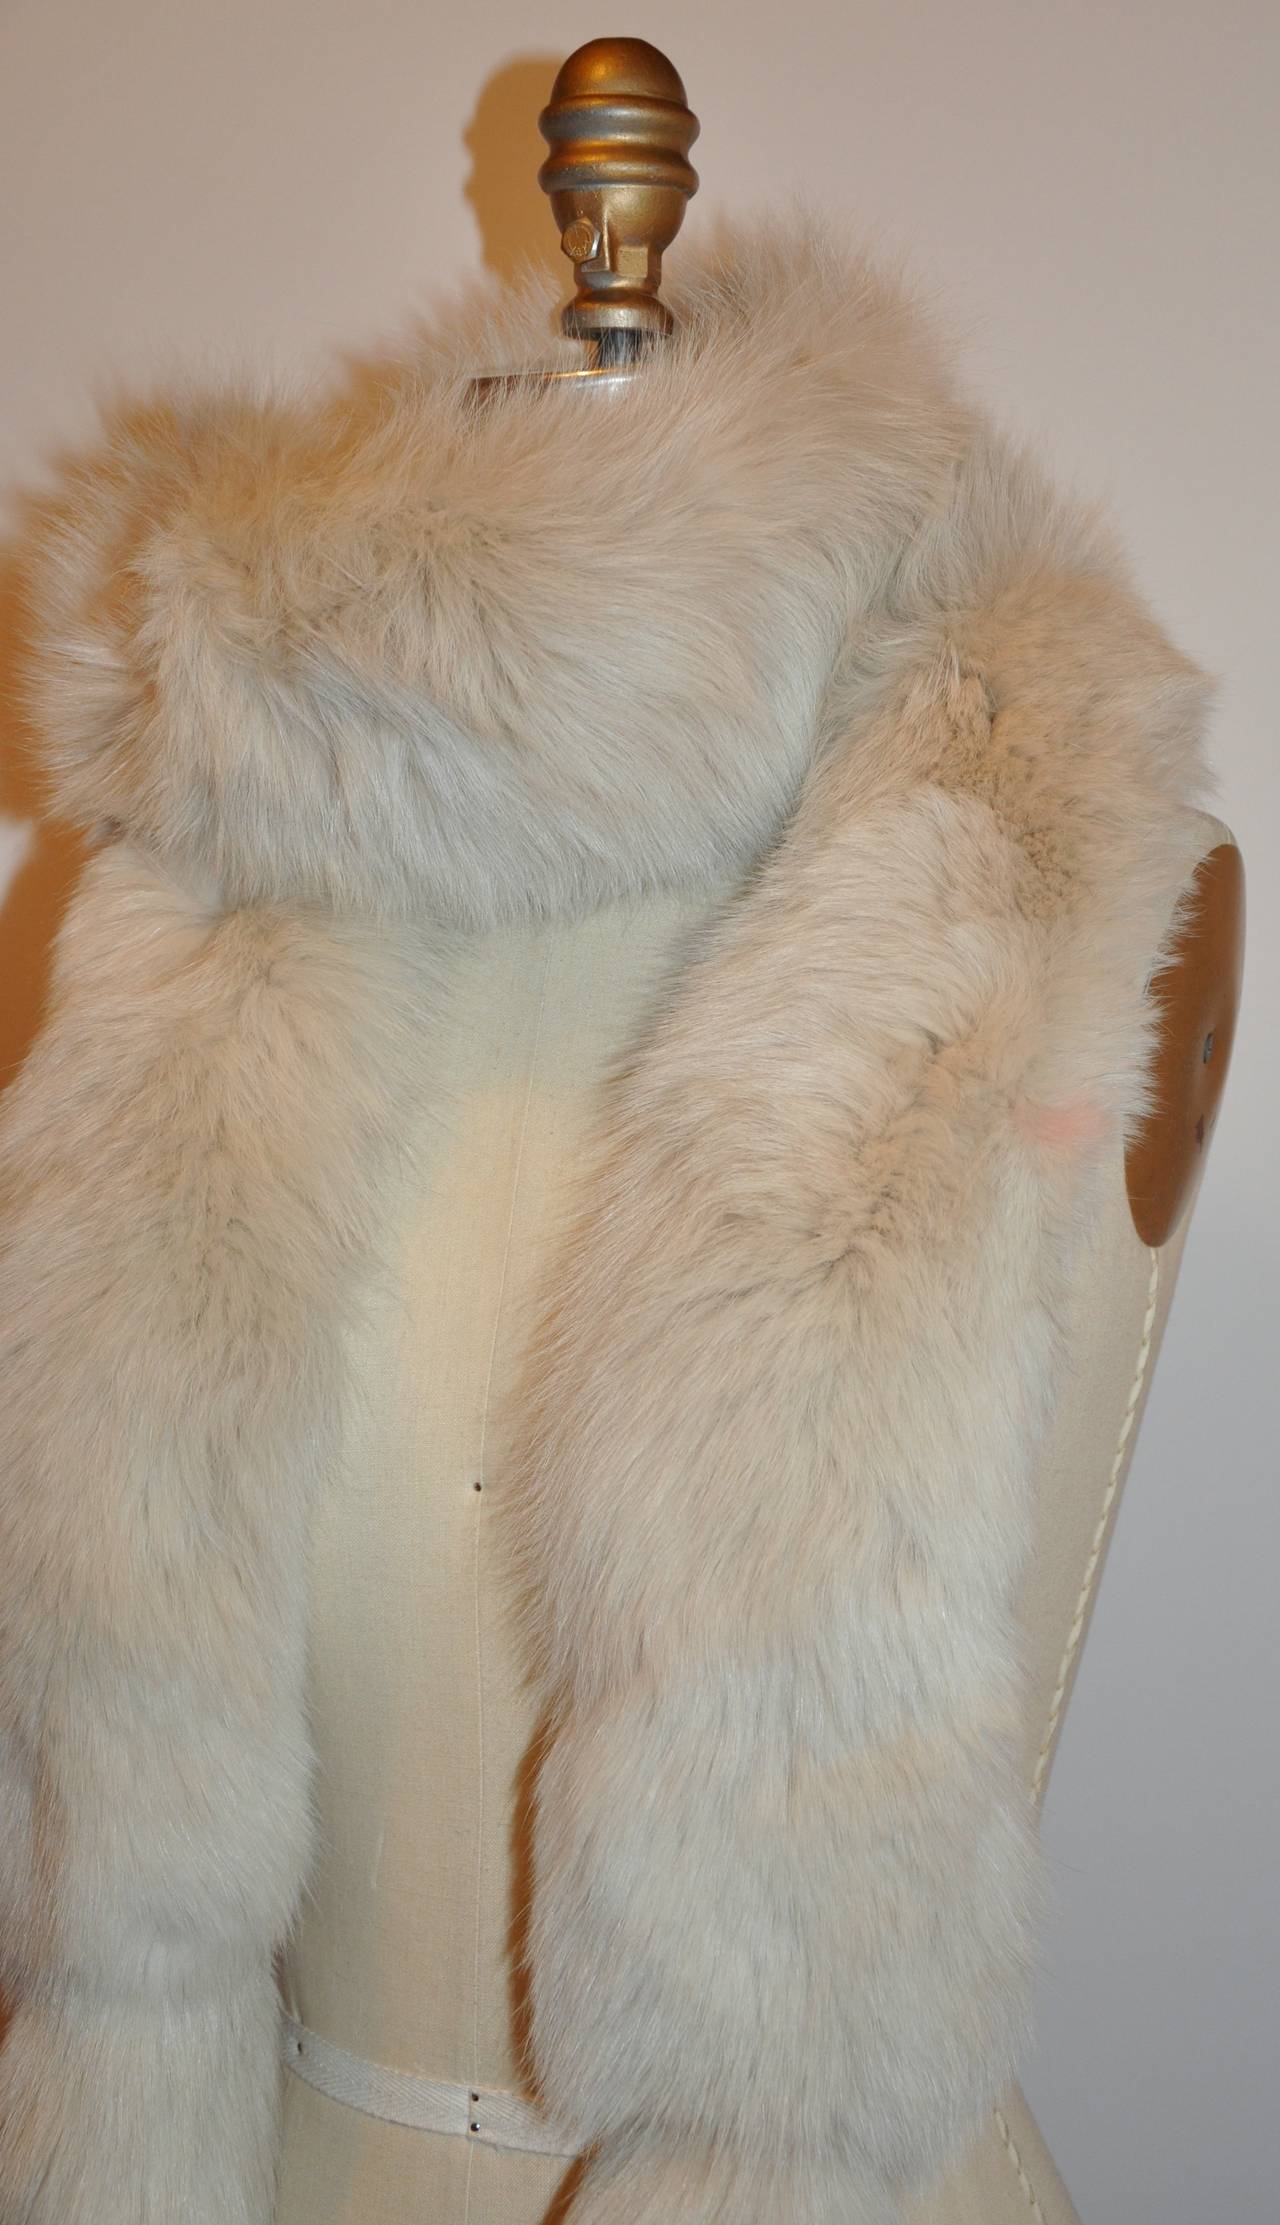 This wonderfully elegant Maxiamlian warm cream fox fur from female skin is accented with fox tails on both ends of this elegant and timeless scarf. The scarf measures 82